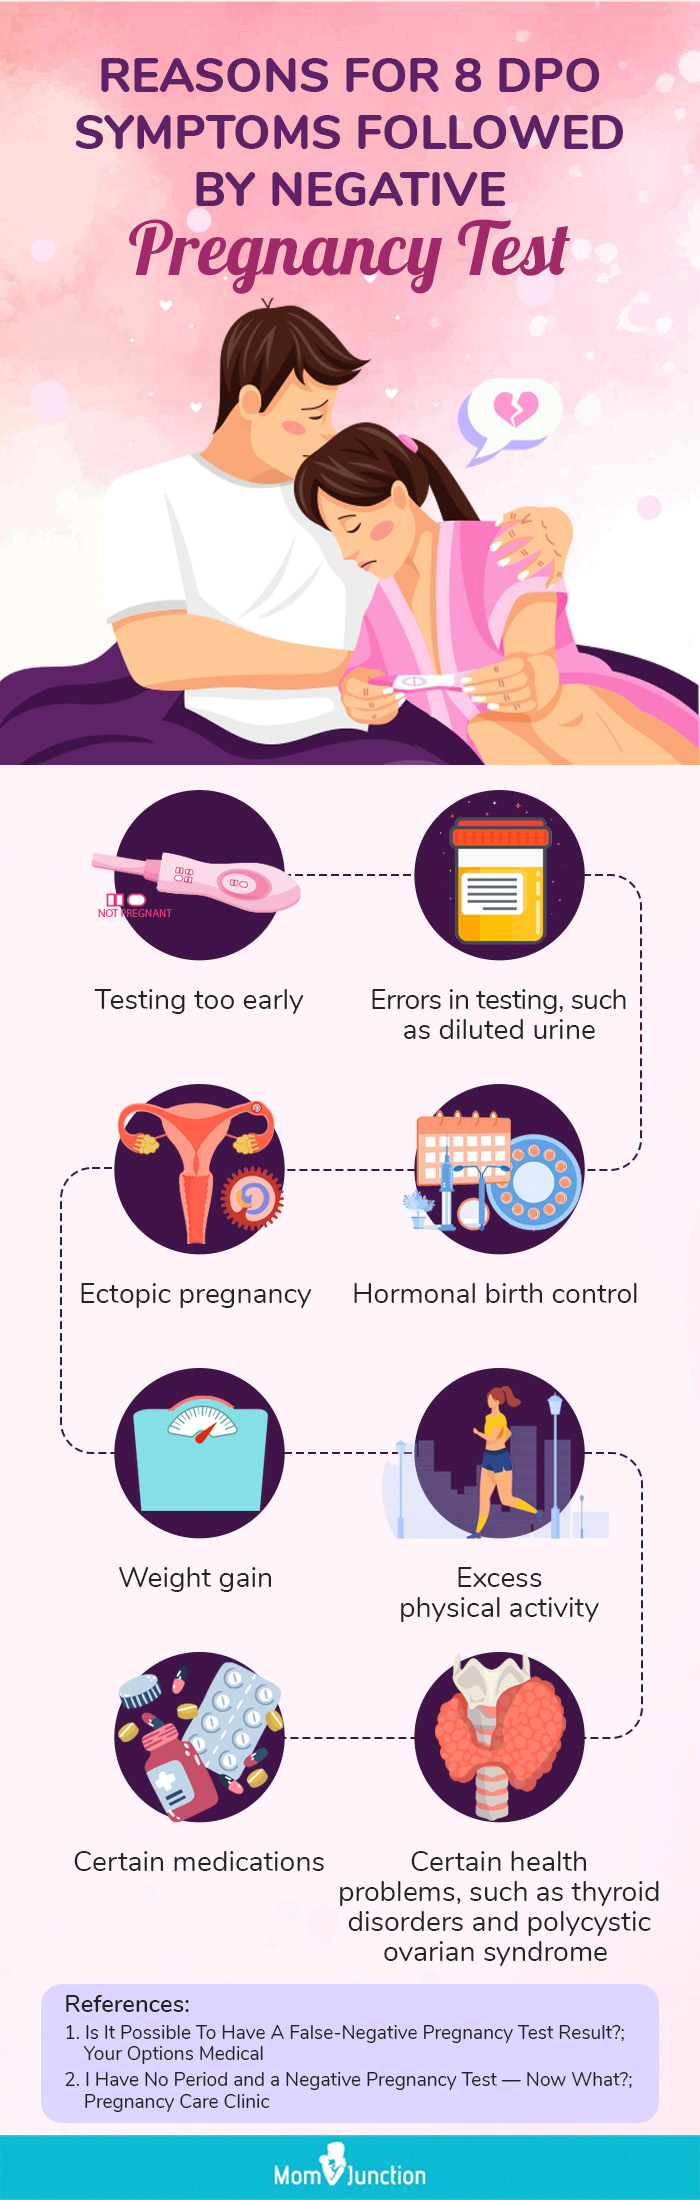 reasons for 8 dpo symptoms followed by negative pregnancy test (infographic)